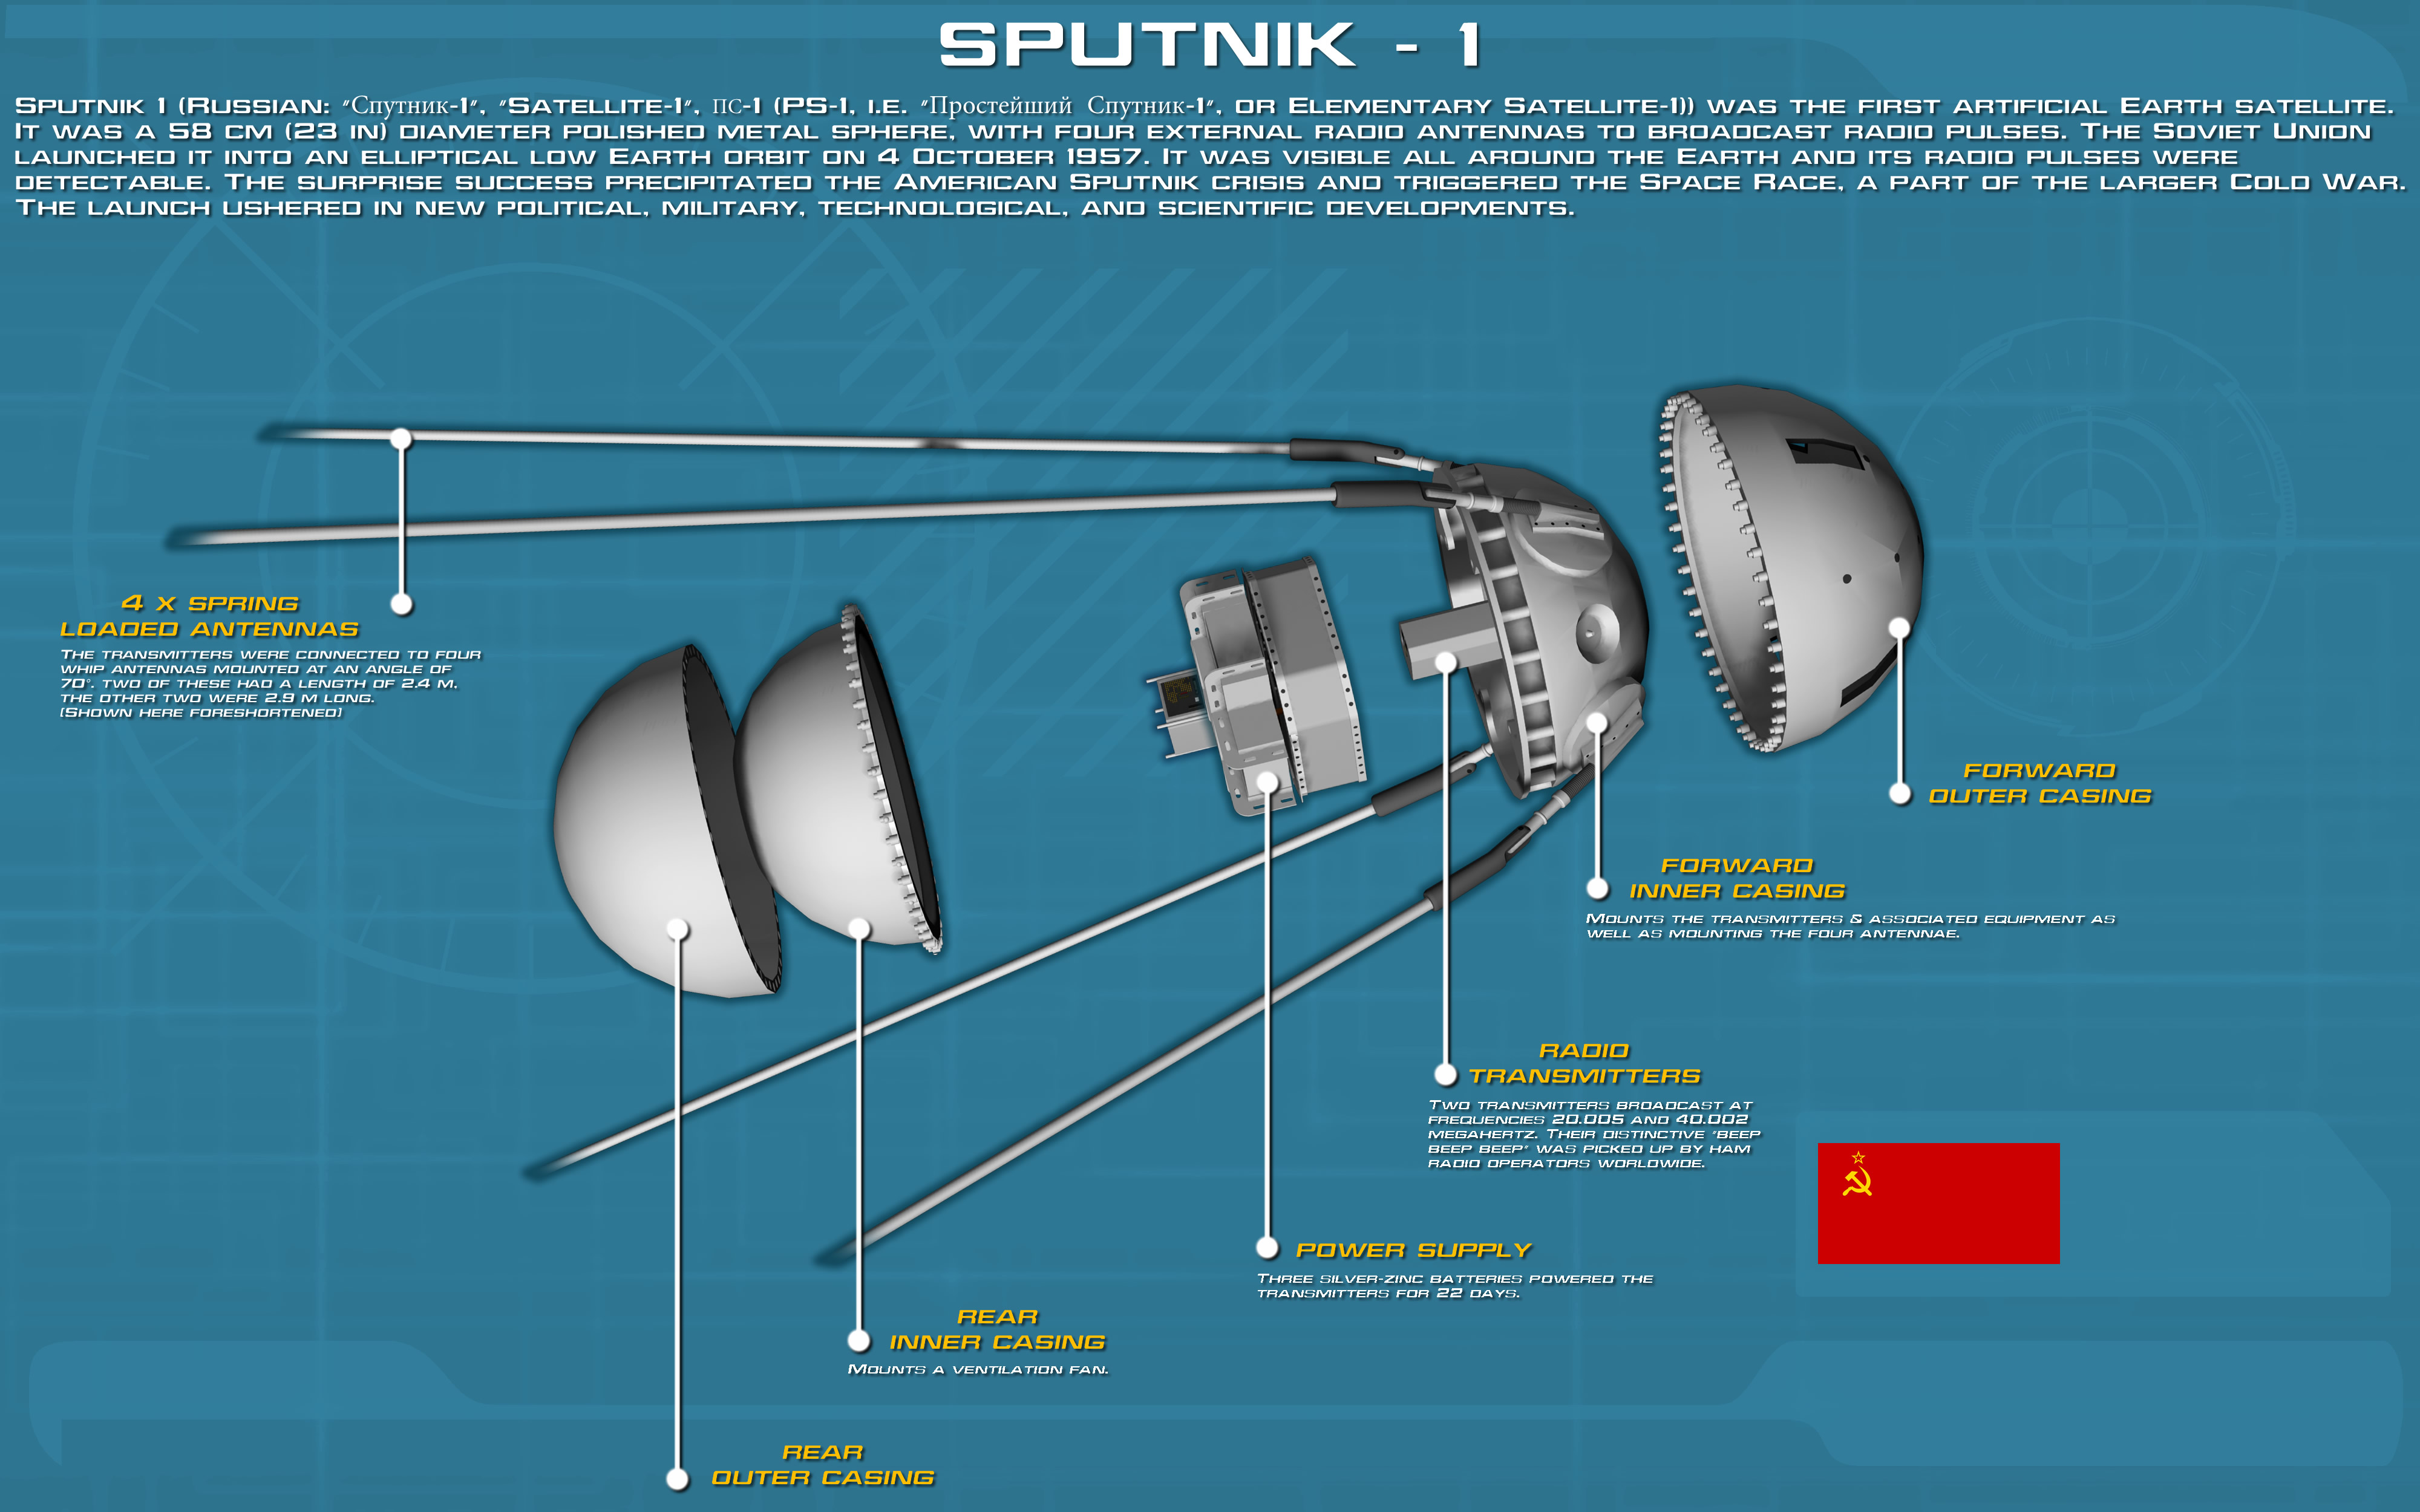 The world’s first artificial satellite called Sputnik launched by the